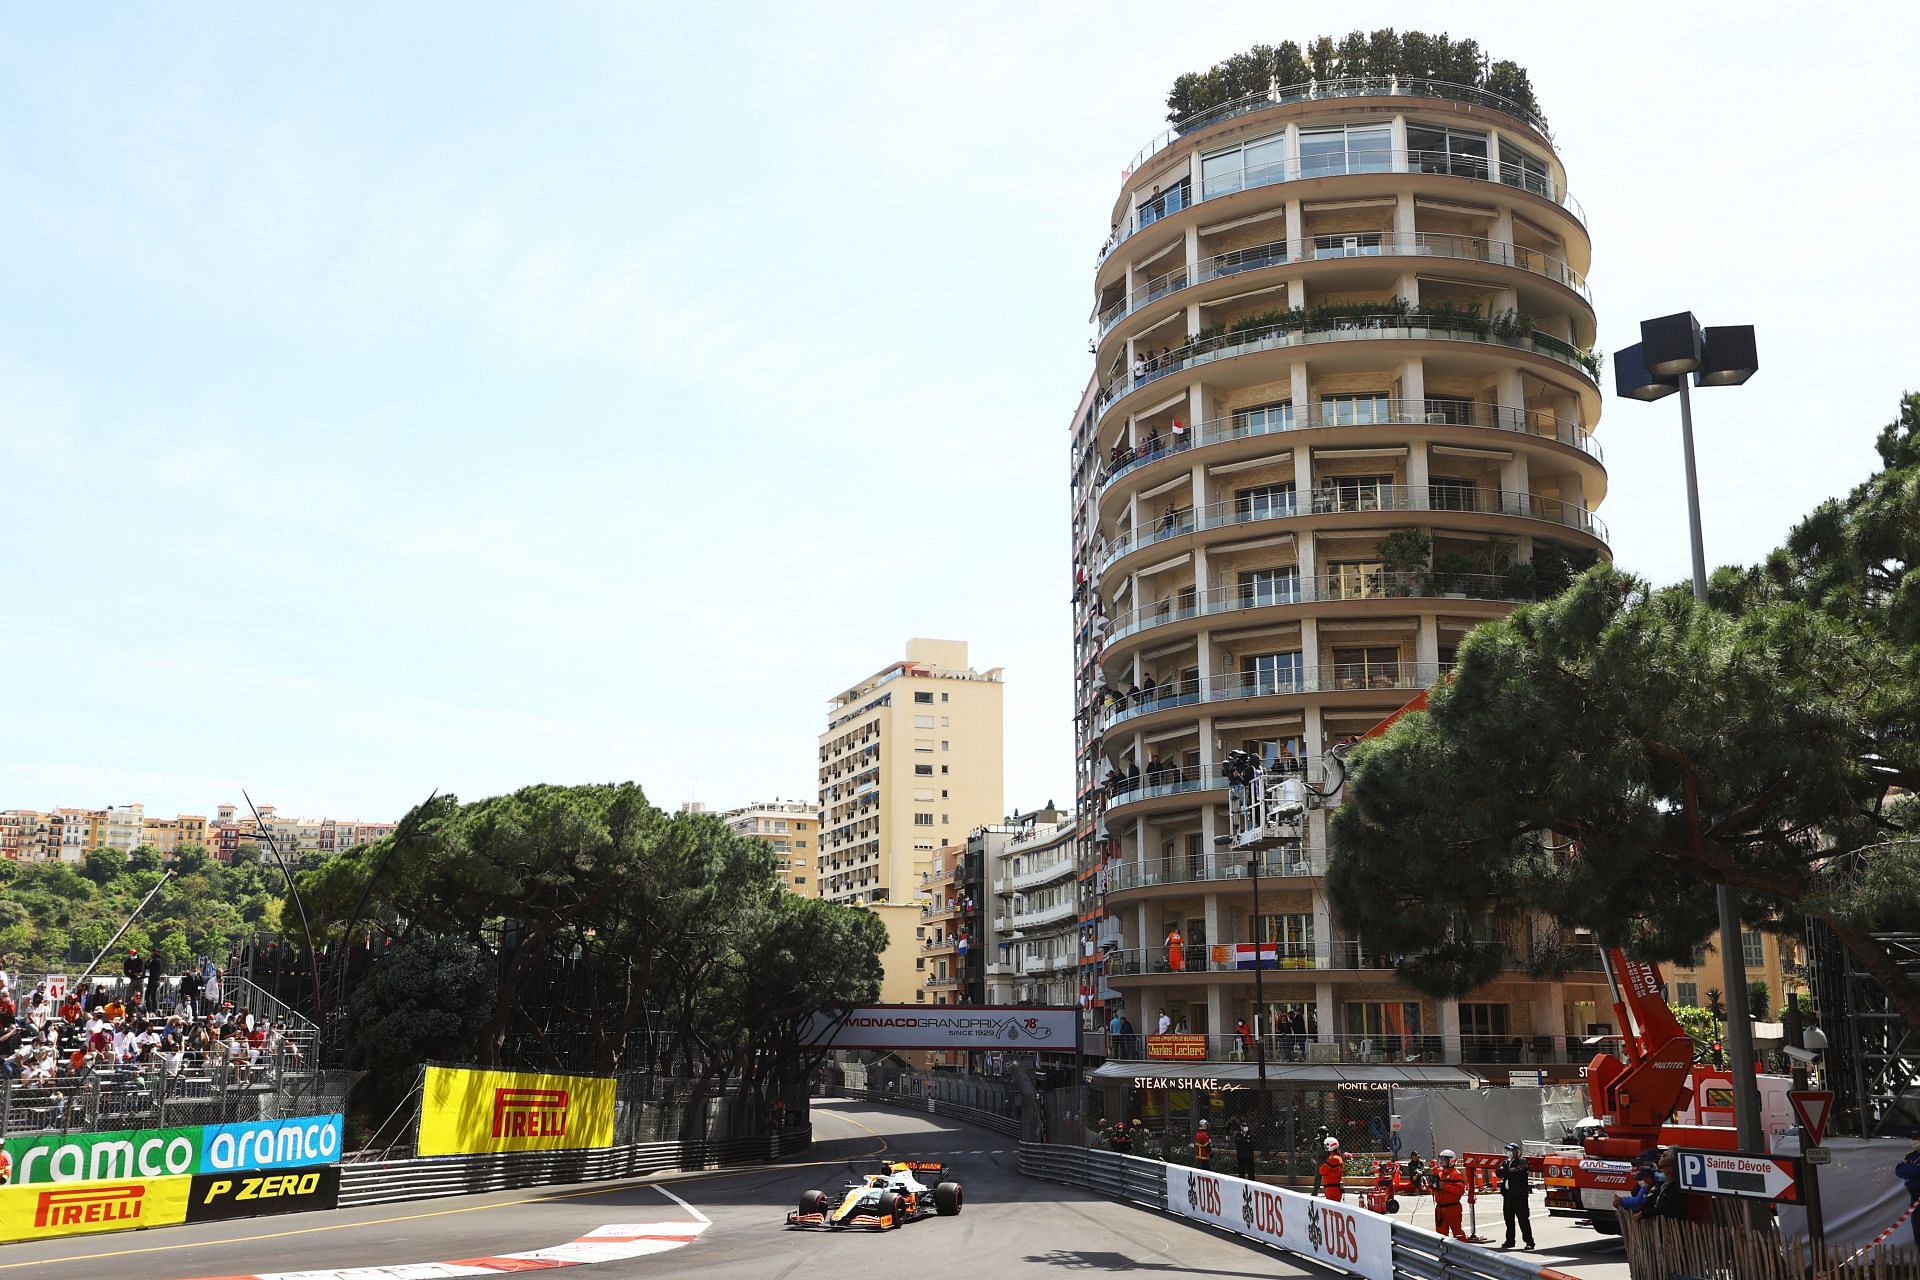 The 2022 F1 Monaco GP could serve up a few surprises this weekend. (Photo by Bryn Lennon/Getty Images)